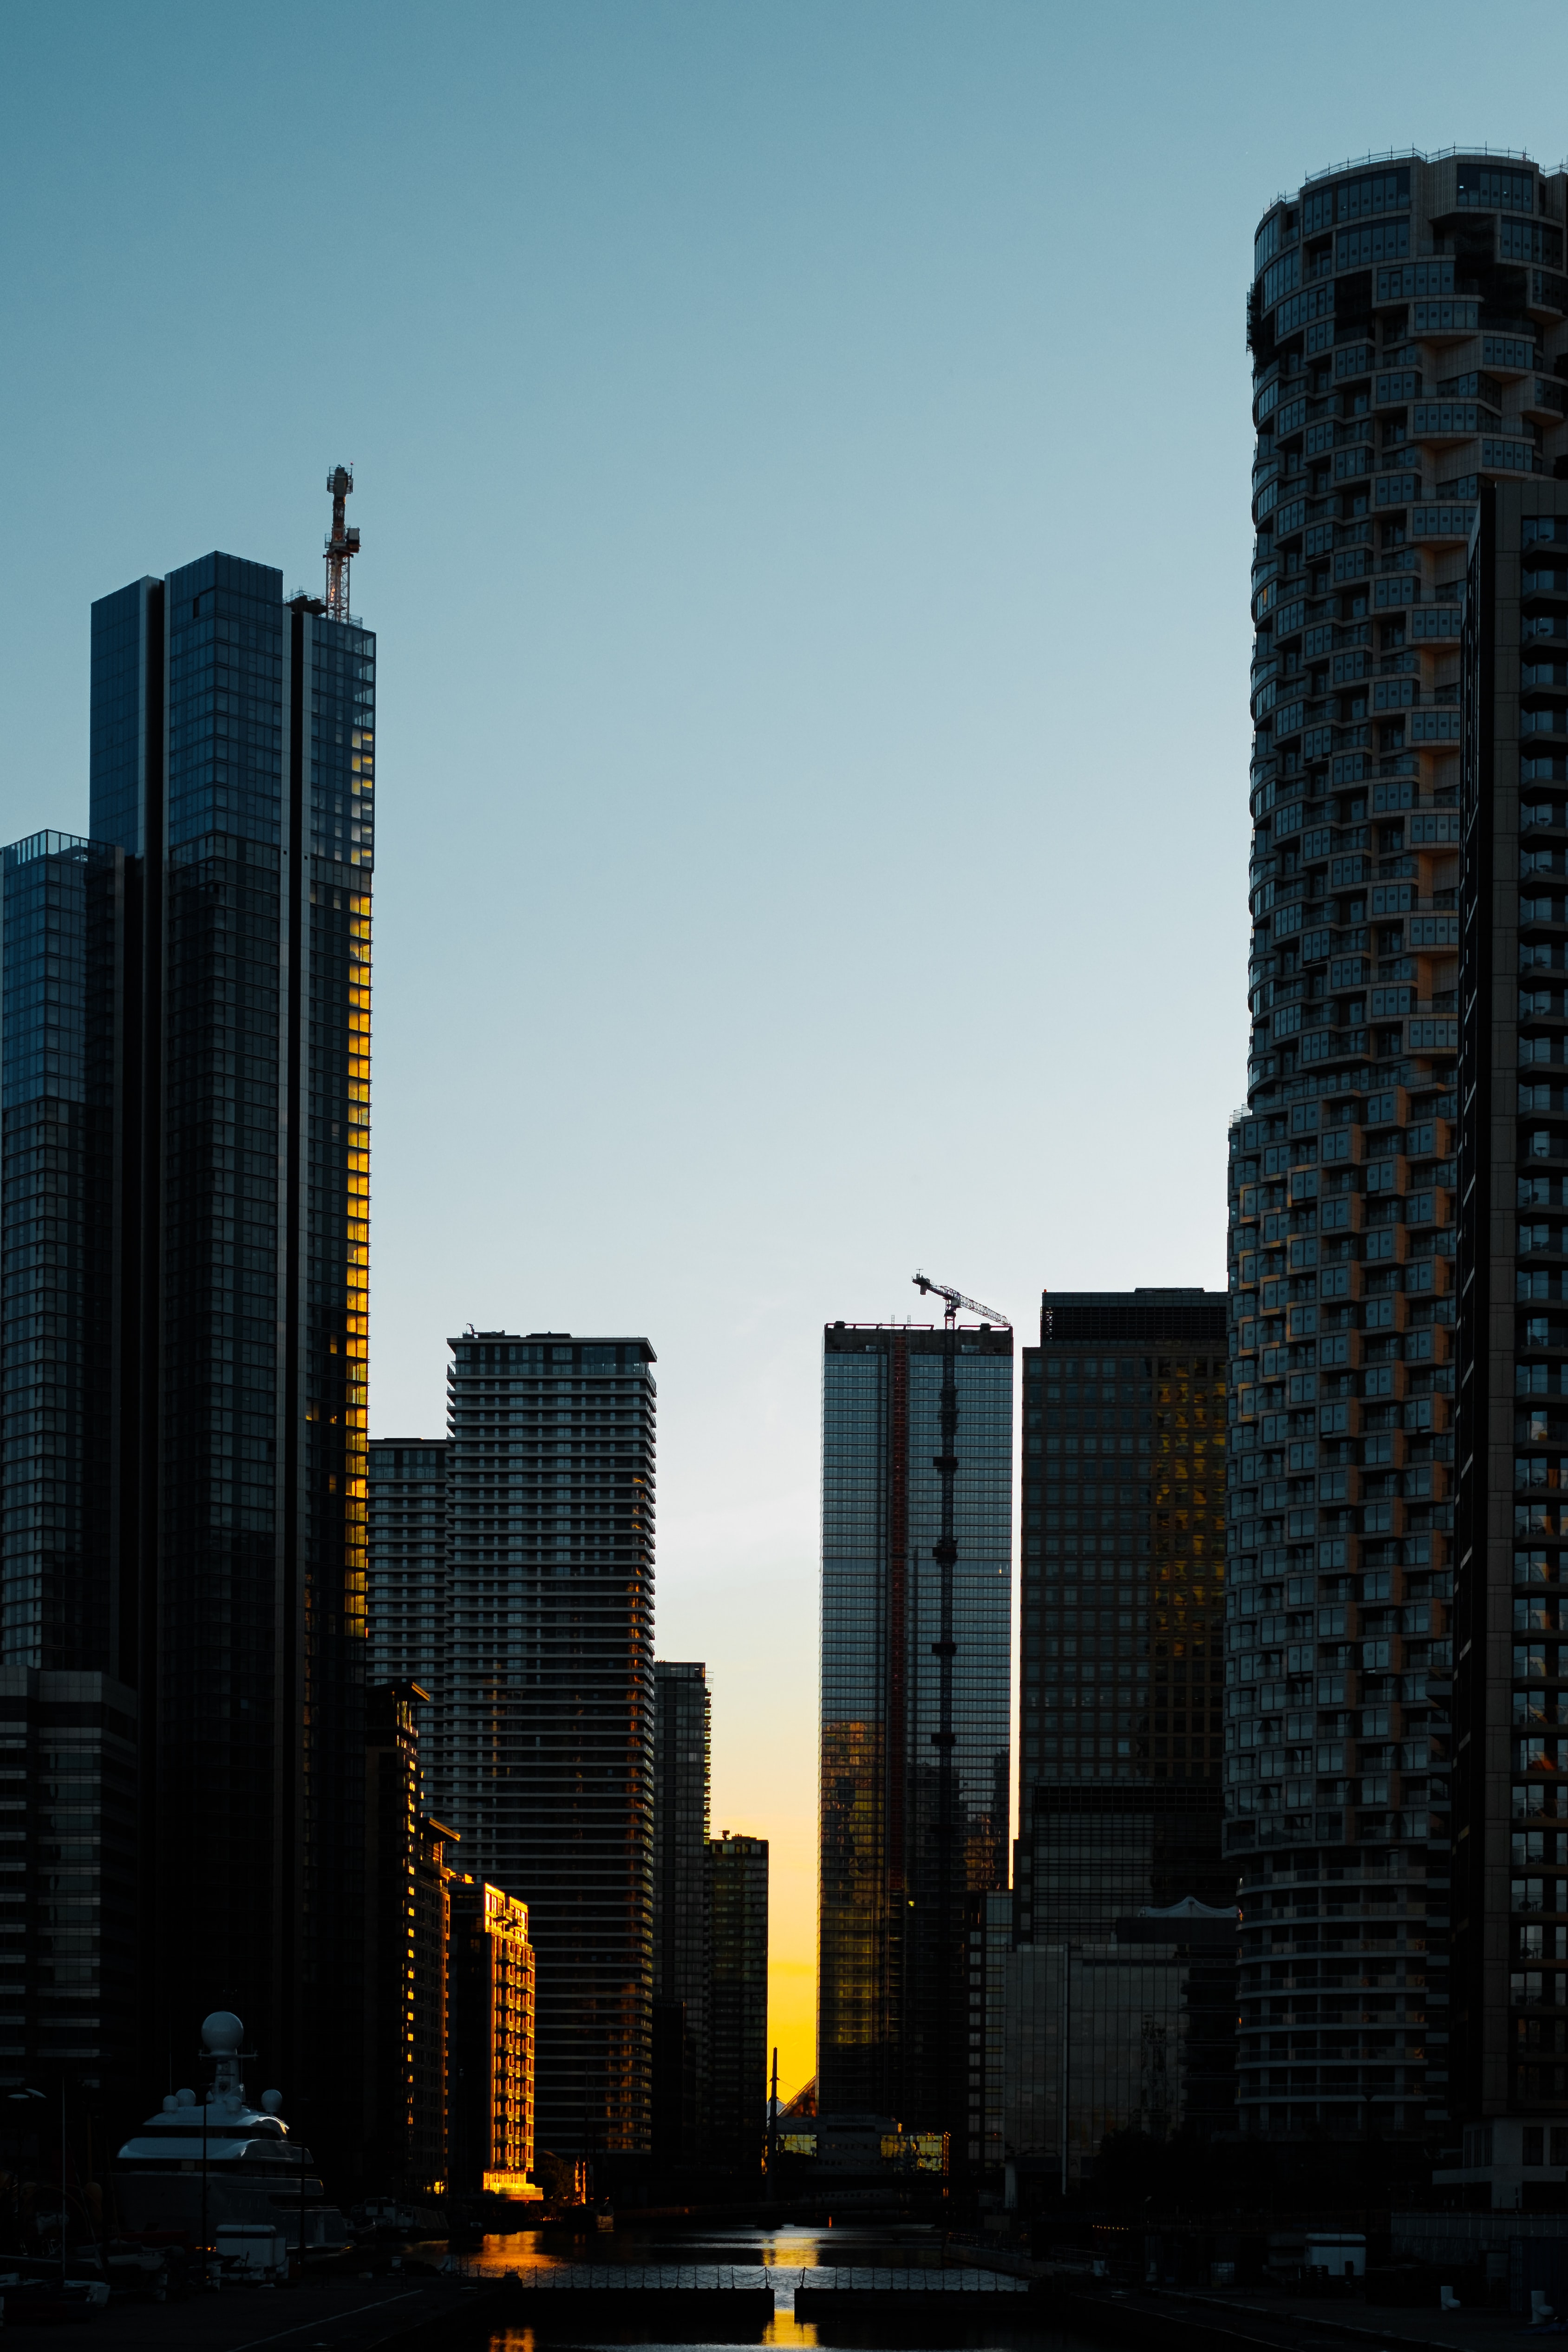 streets, cities, sunset, city, building